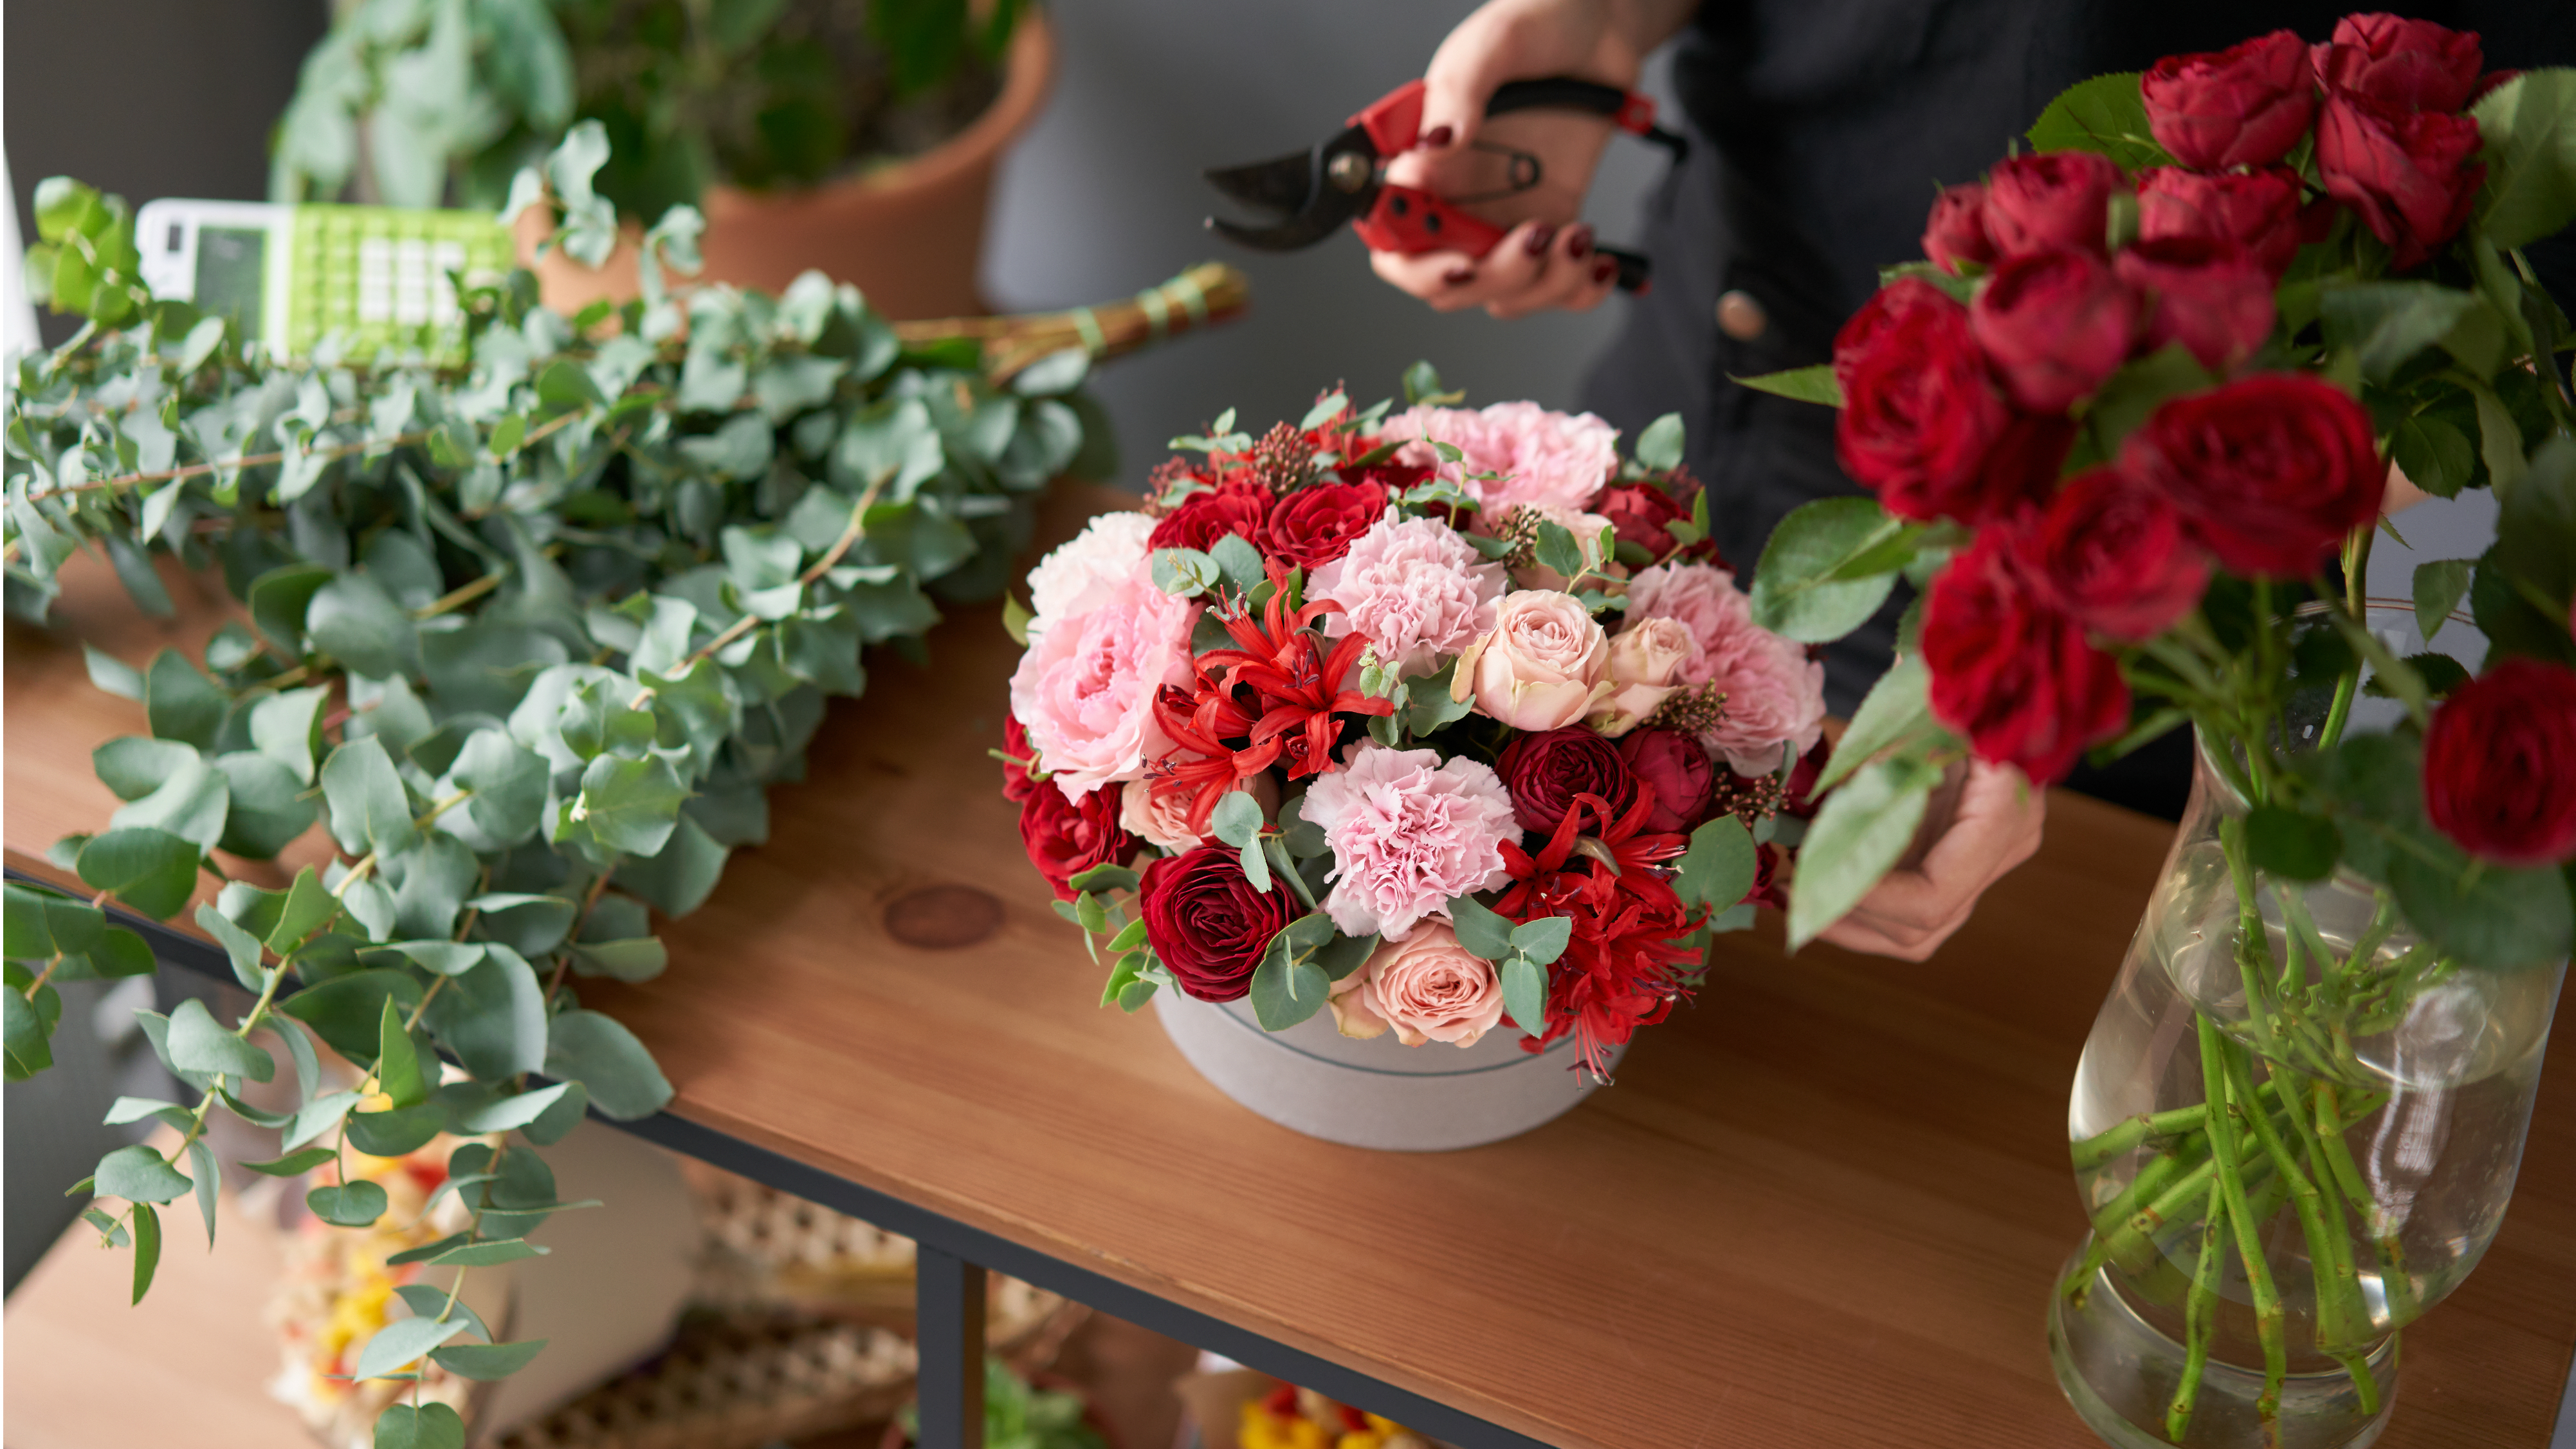 How to Shop For Flowers Online